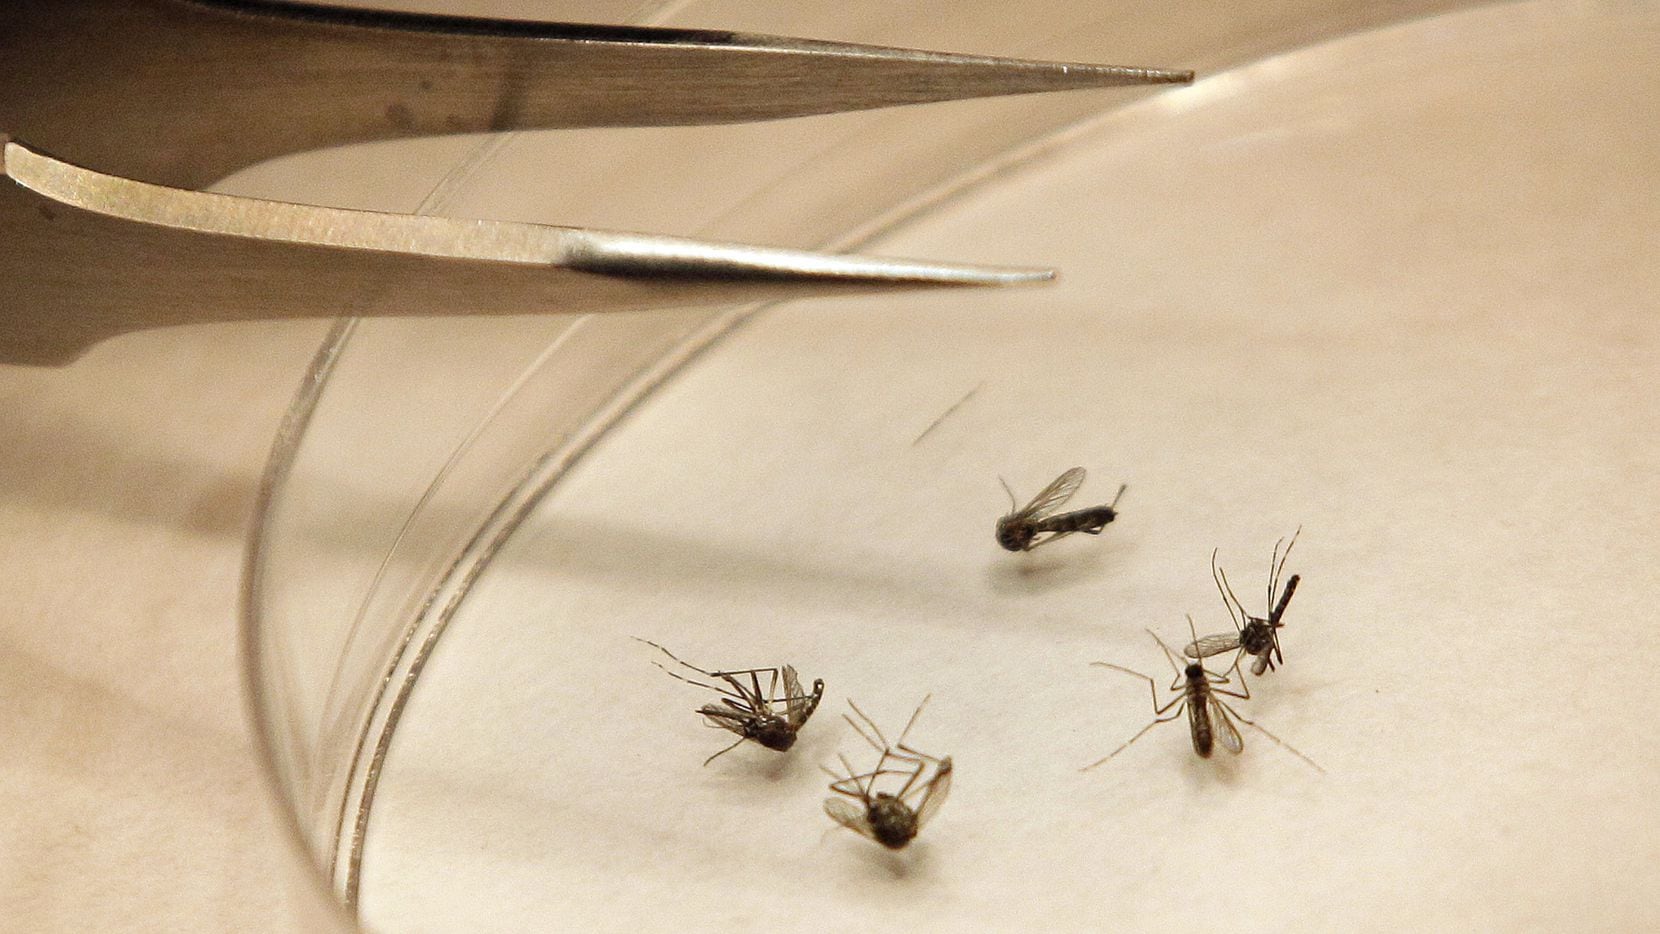 Richardson will spray for mosquitos in two areas on Wednesday night after mosquito samples found in traps tested positive for the West Nile virus.